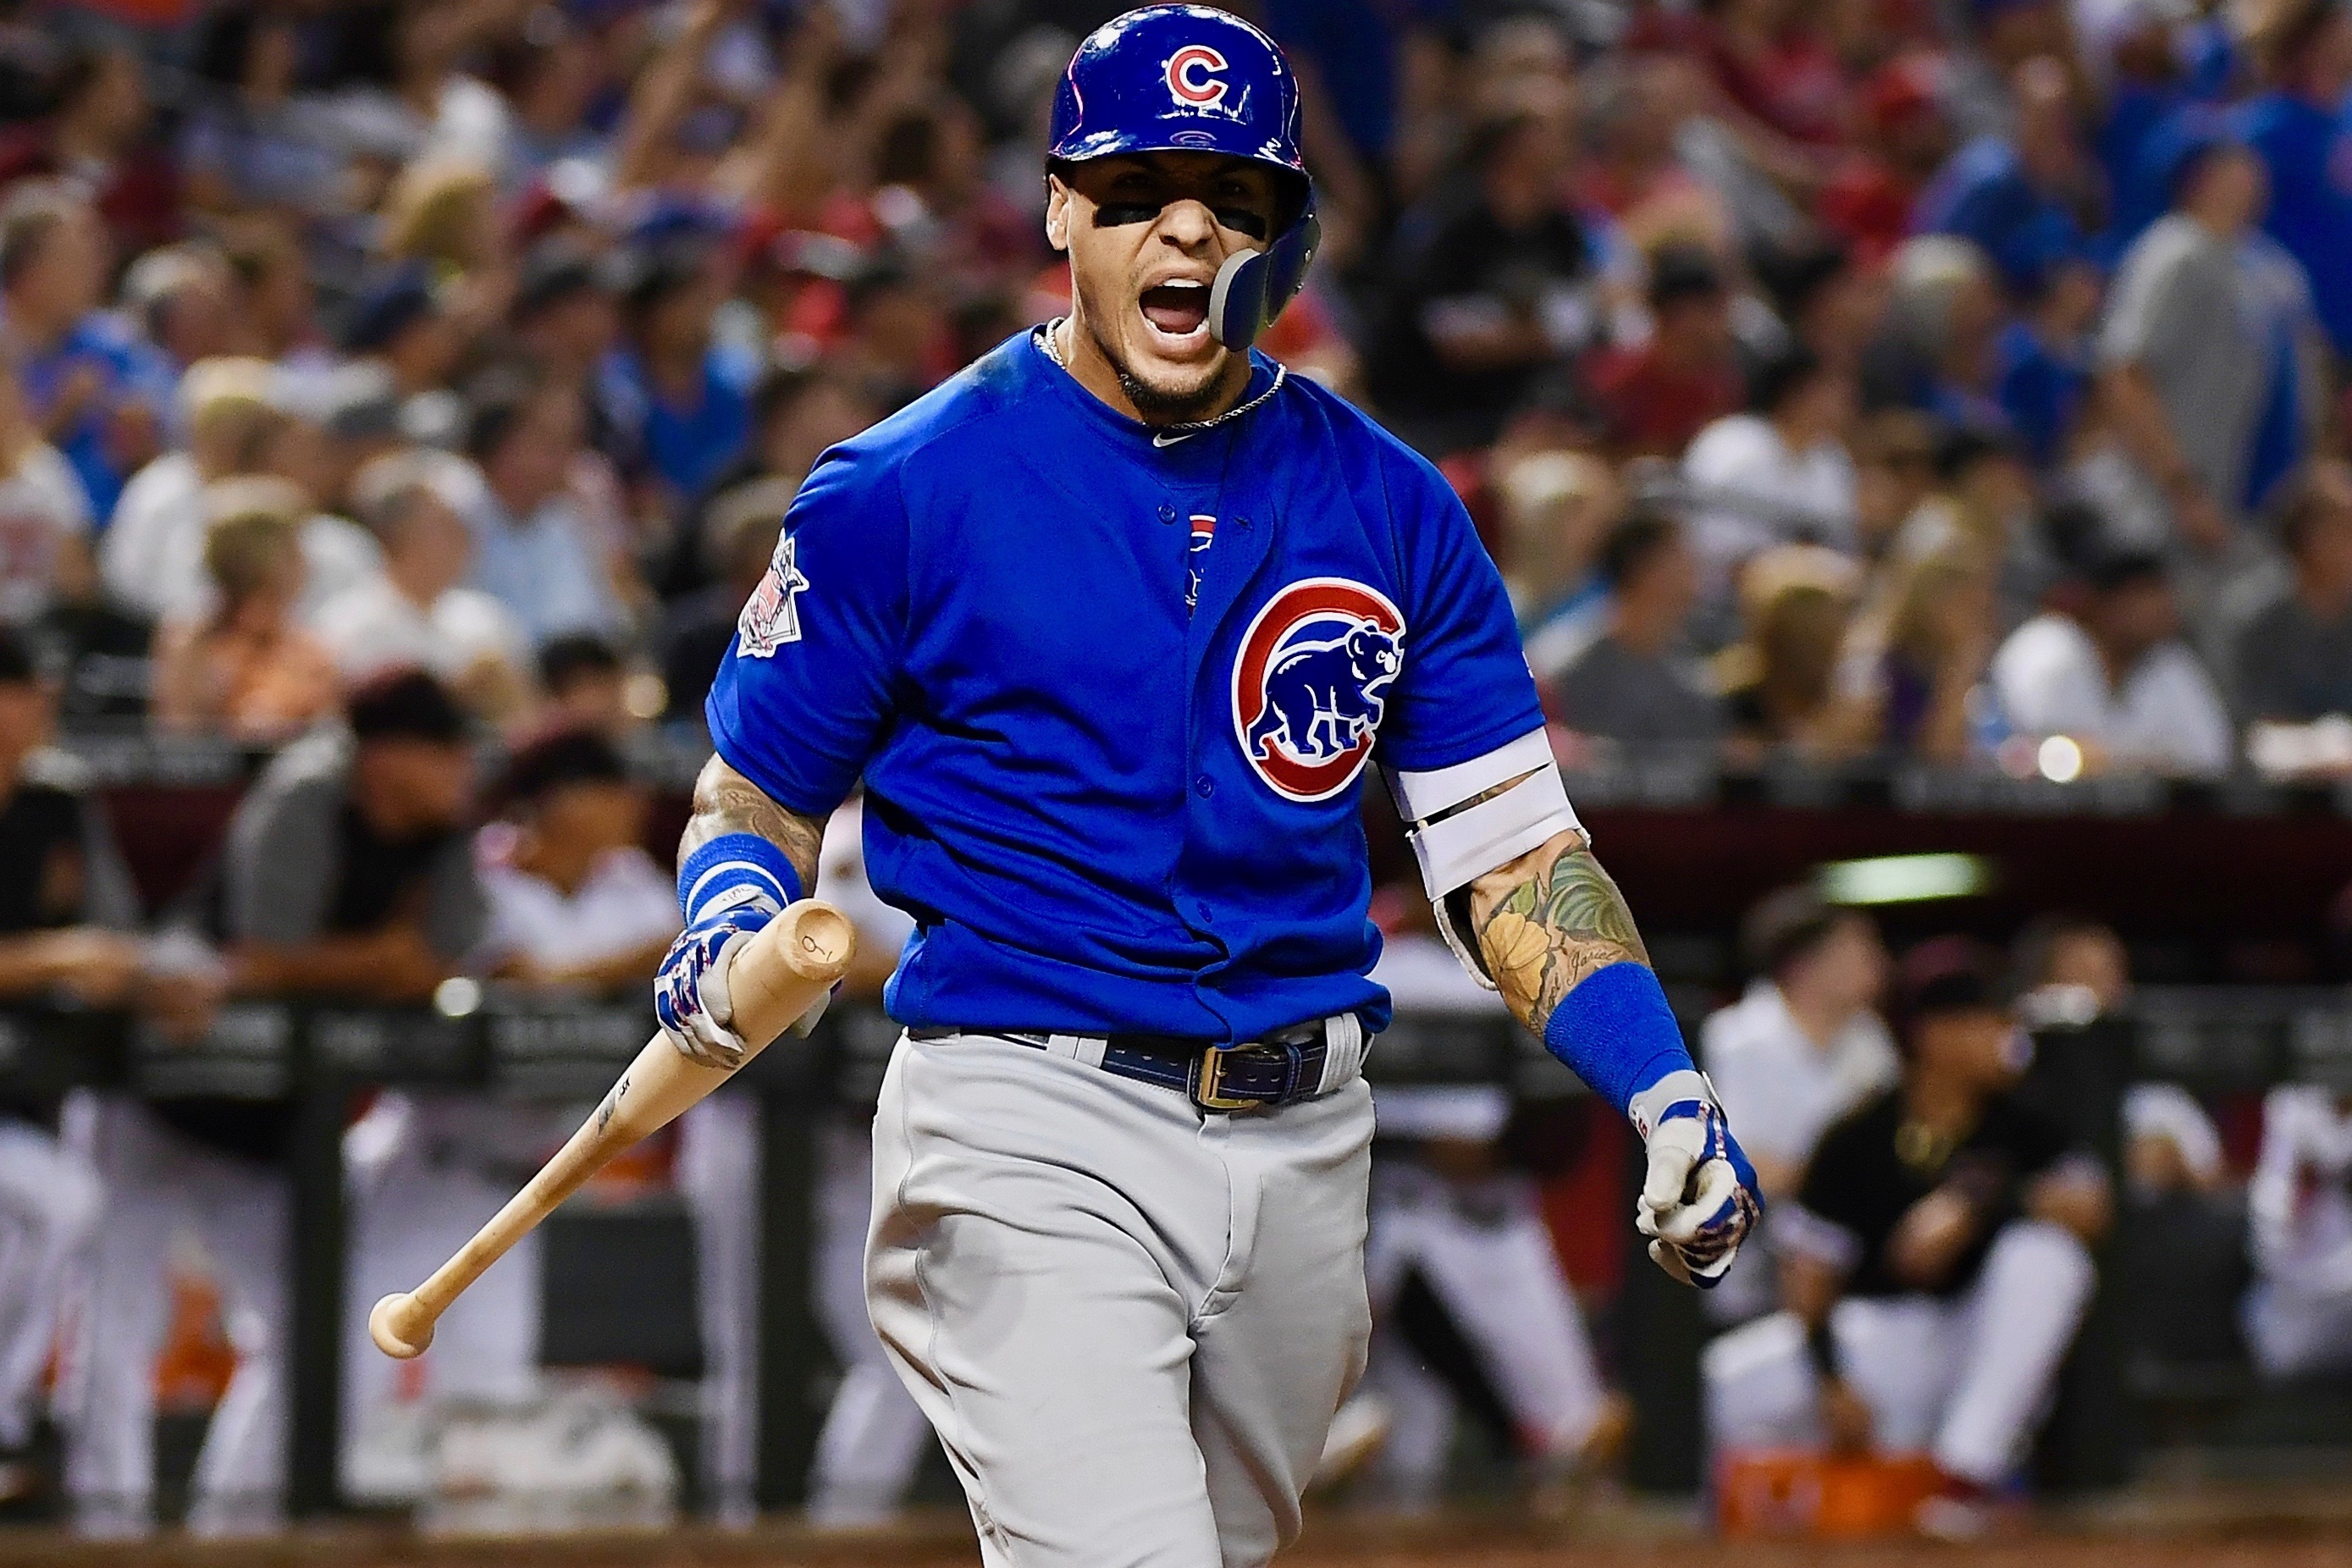 Watch: Javy Baez Had Another Amazing Javy Baez Moment With